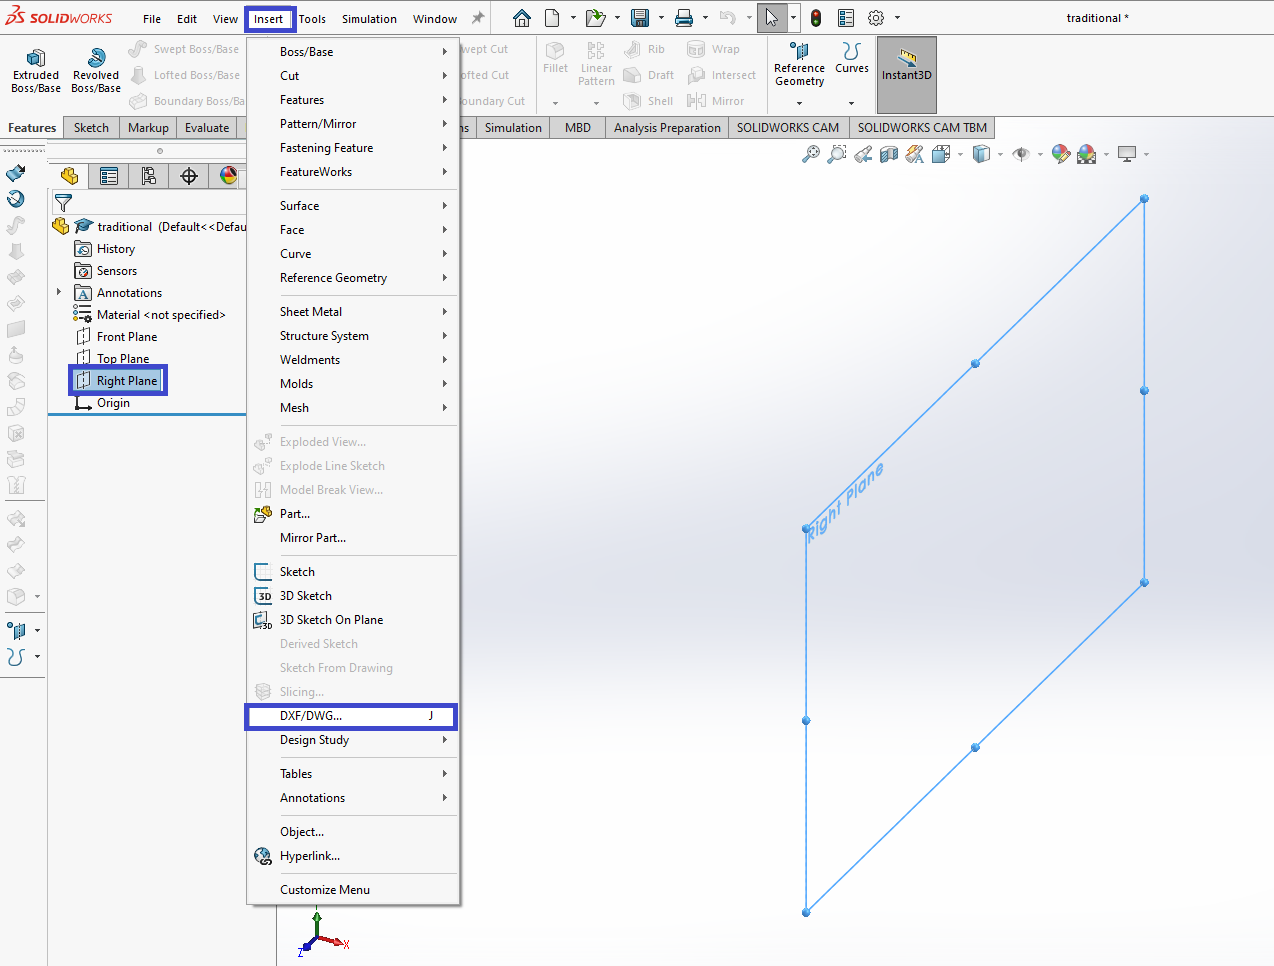 Mapping Entities When Saving Drawings as DXF or DWG Files  2021   SOLIDWORKS Help